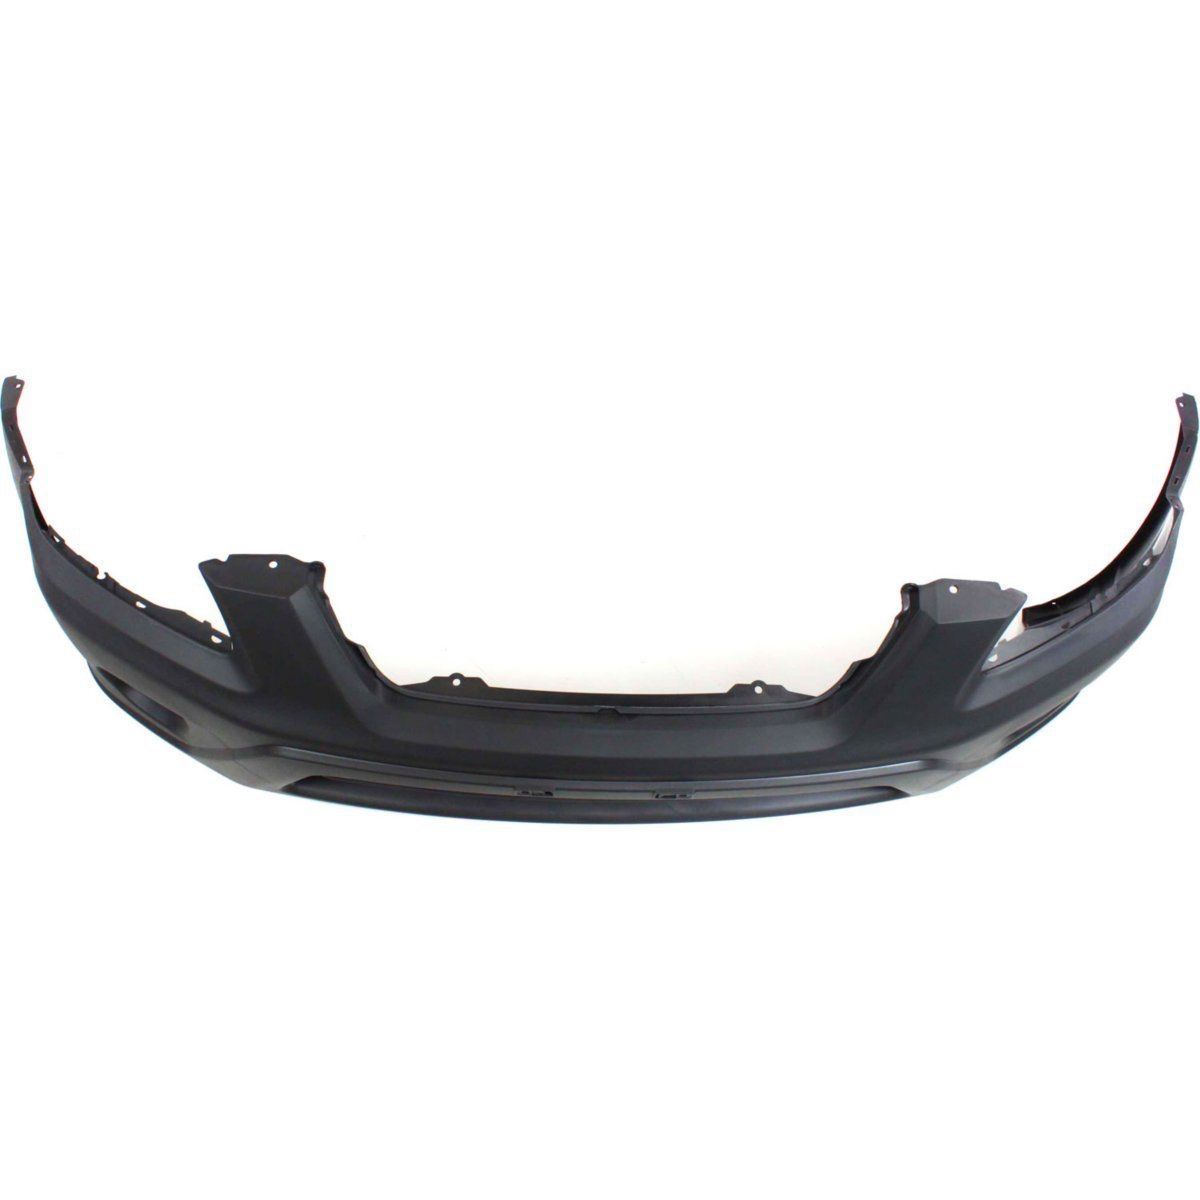 2005-2006 HONDA CR-V Front Bumper Cover EX/LX  Japan built Painted to Match